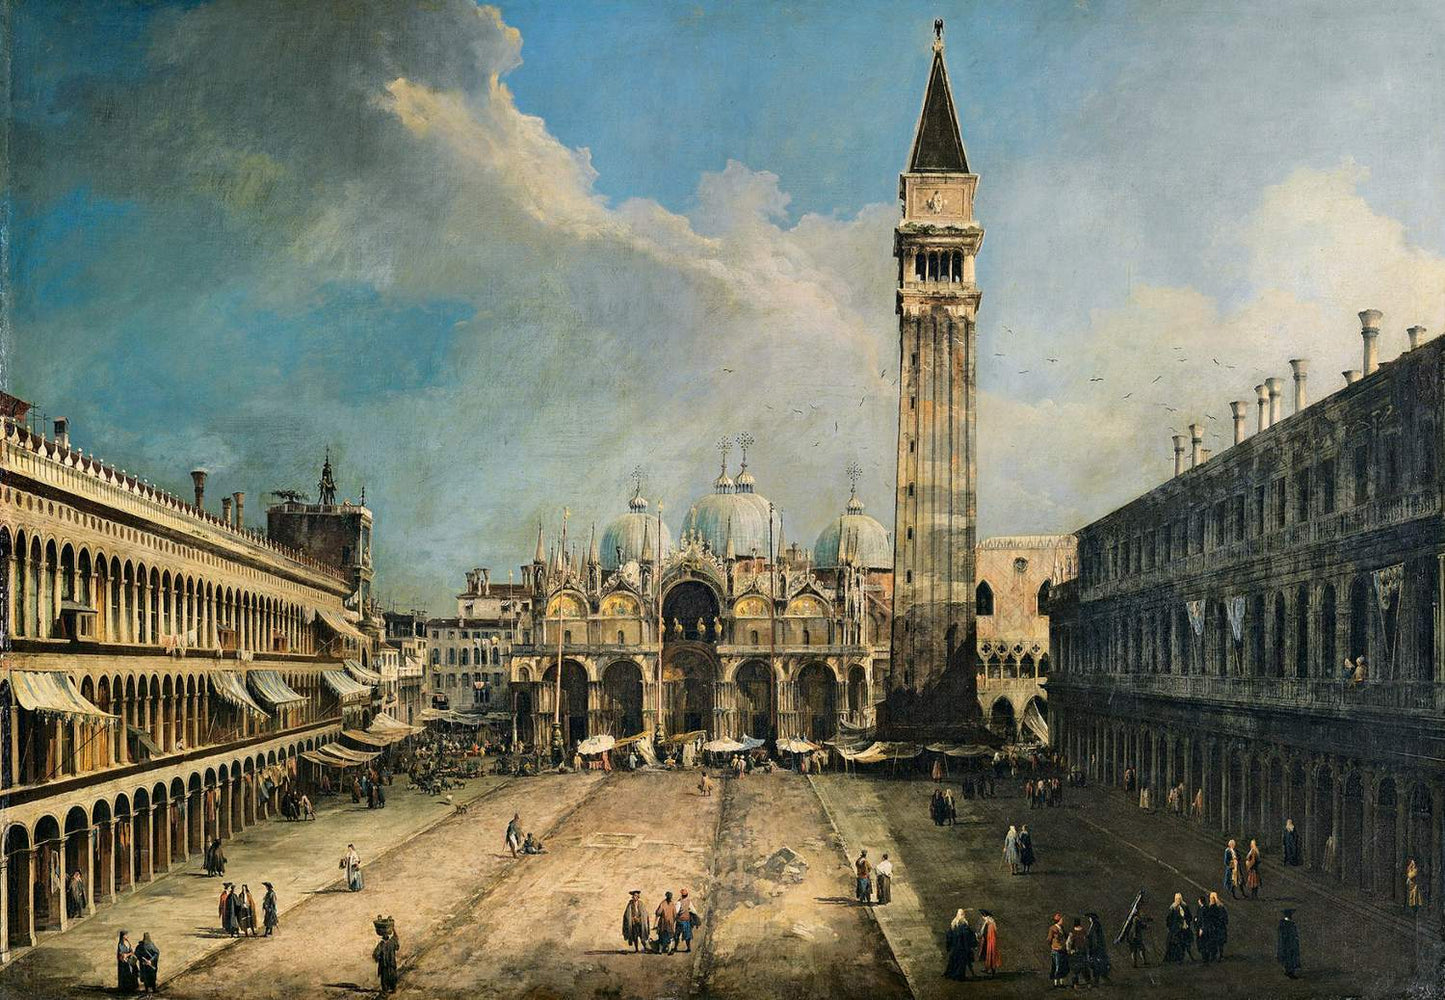 The Piazza San Marco in Venice, Canaletto, Canaletto